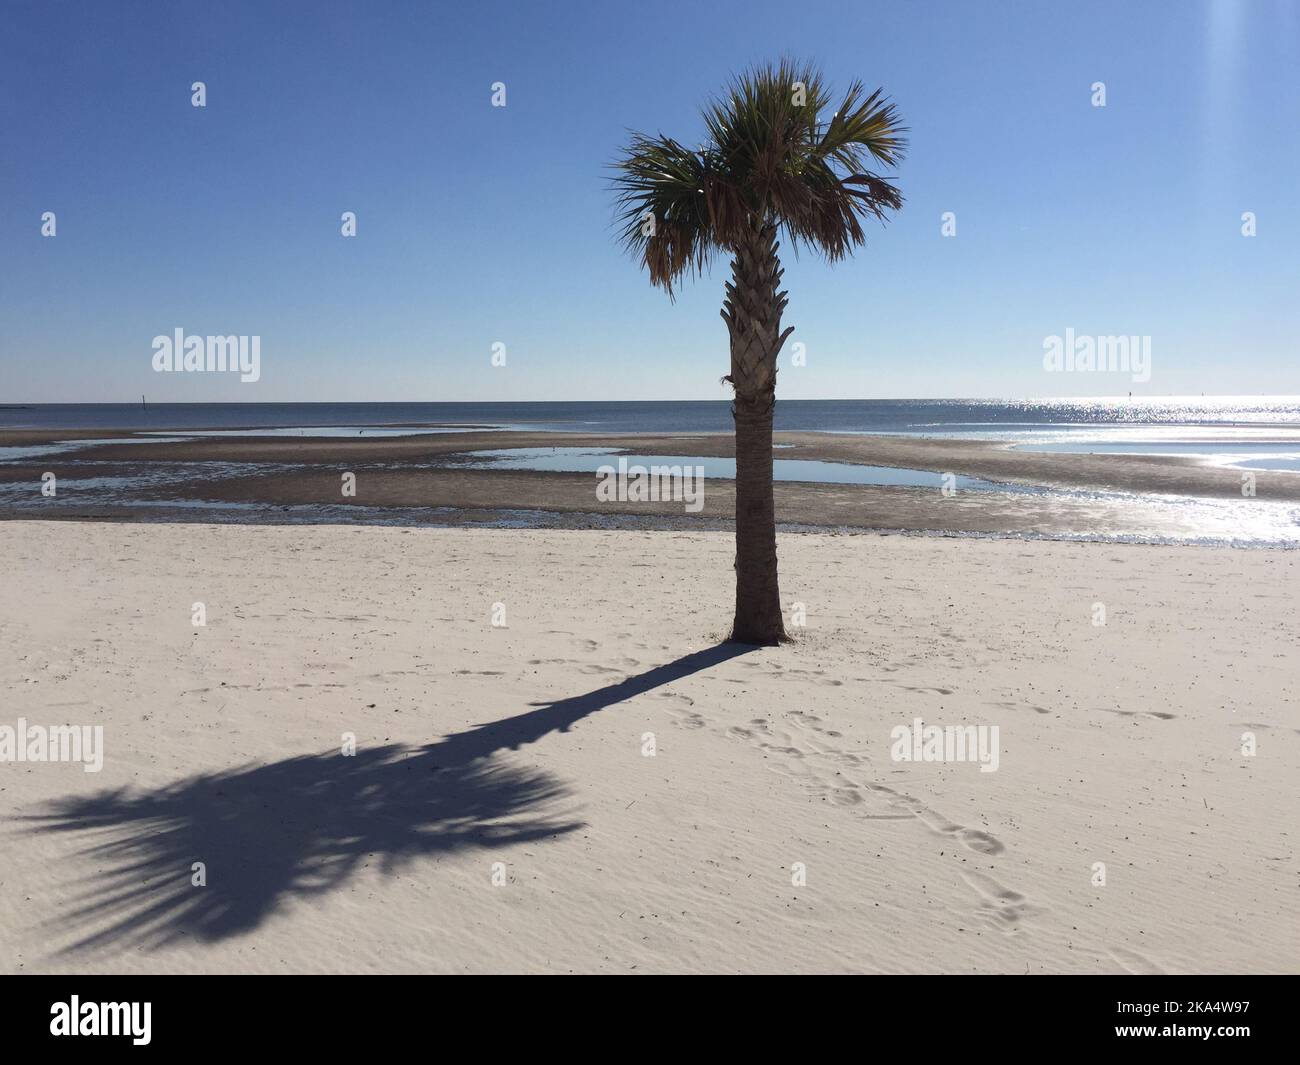 Palm tree and shadow on an empty beach in winter, Biloxi, Mississippi, USA Stock Photo